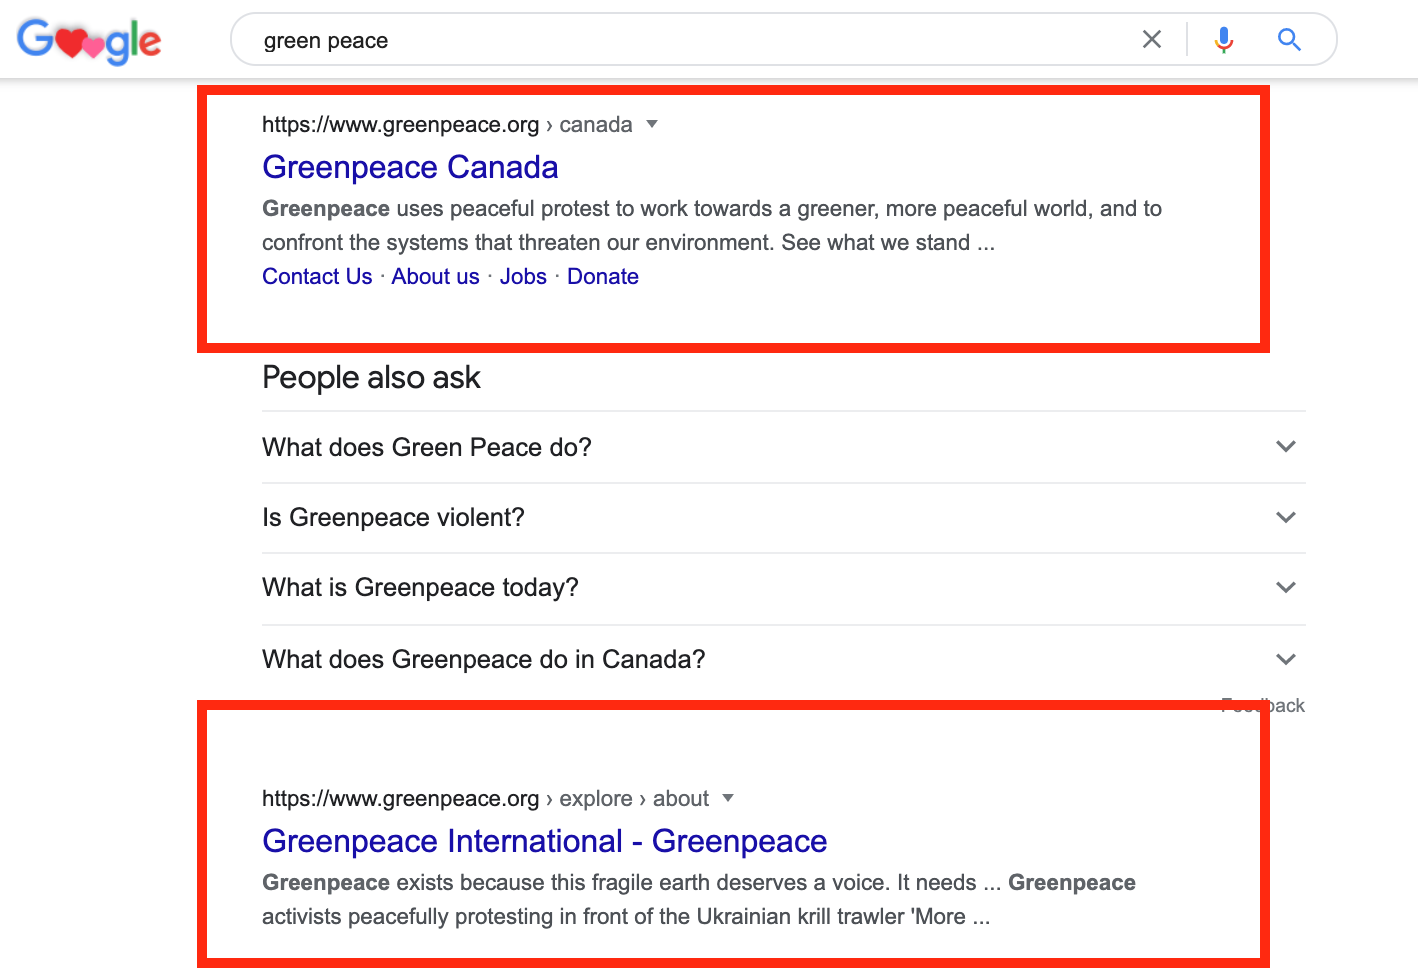 GreenPeace Website Pages in Branded Search.